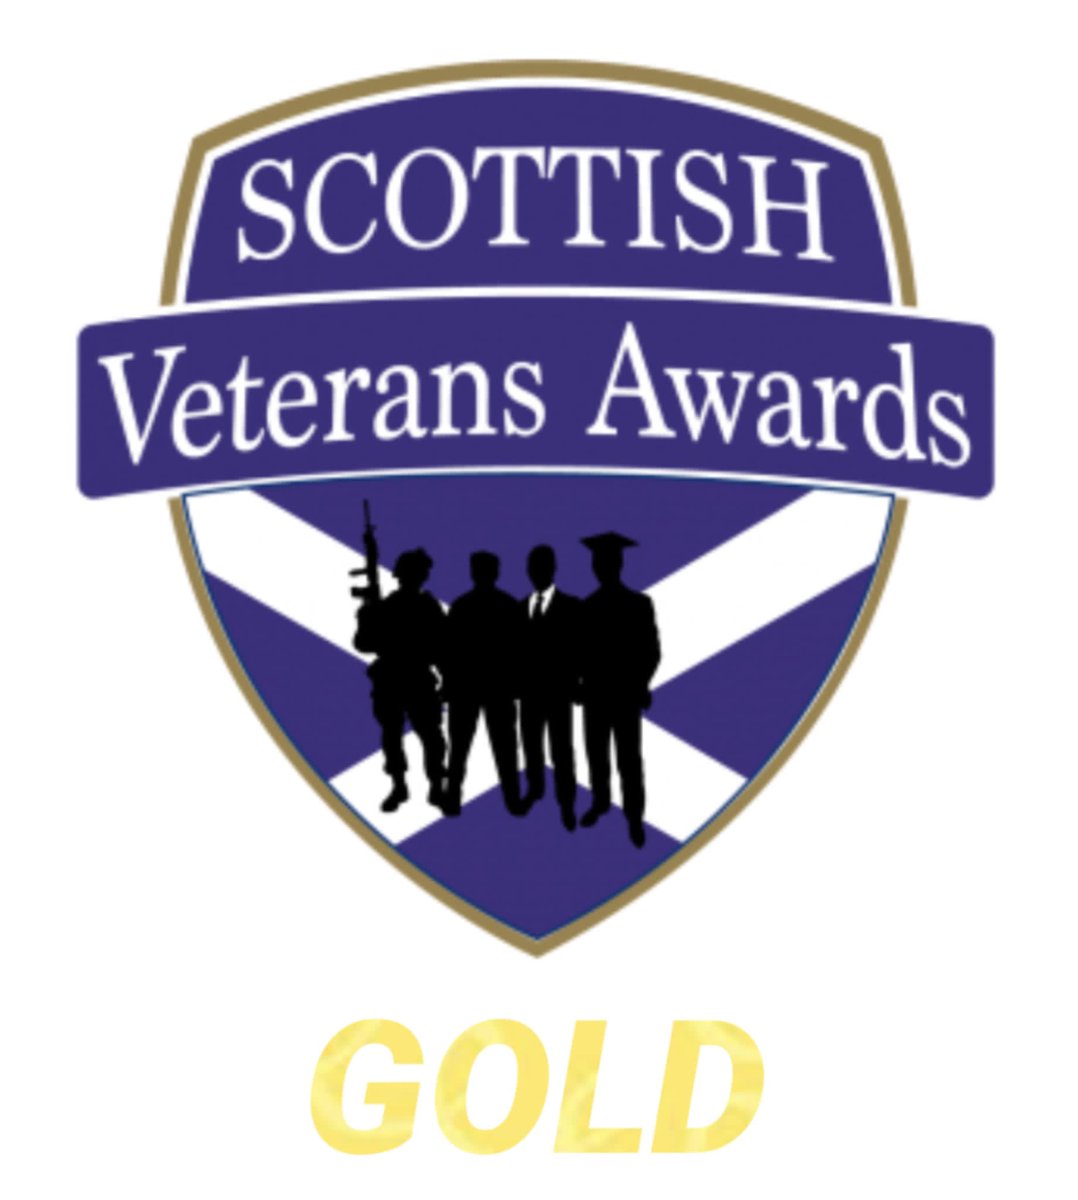 We are so honoured to have WON the Health and Wellbeing Award at the Scottish #VeteransAwards!🏆A huge achievement for our small team who are making a big impact in so many communities. Thank you to our amazing partners and to the other amazing finalists 👏🏻 @ScotVeteranComm